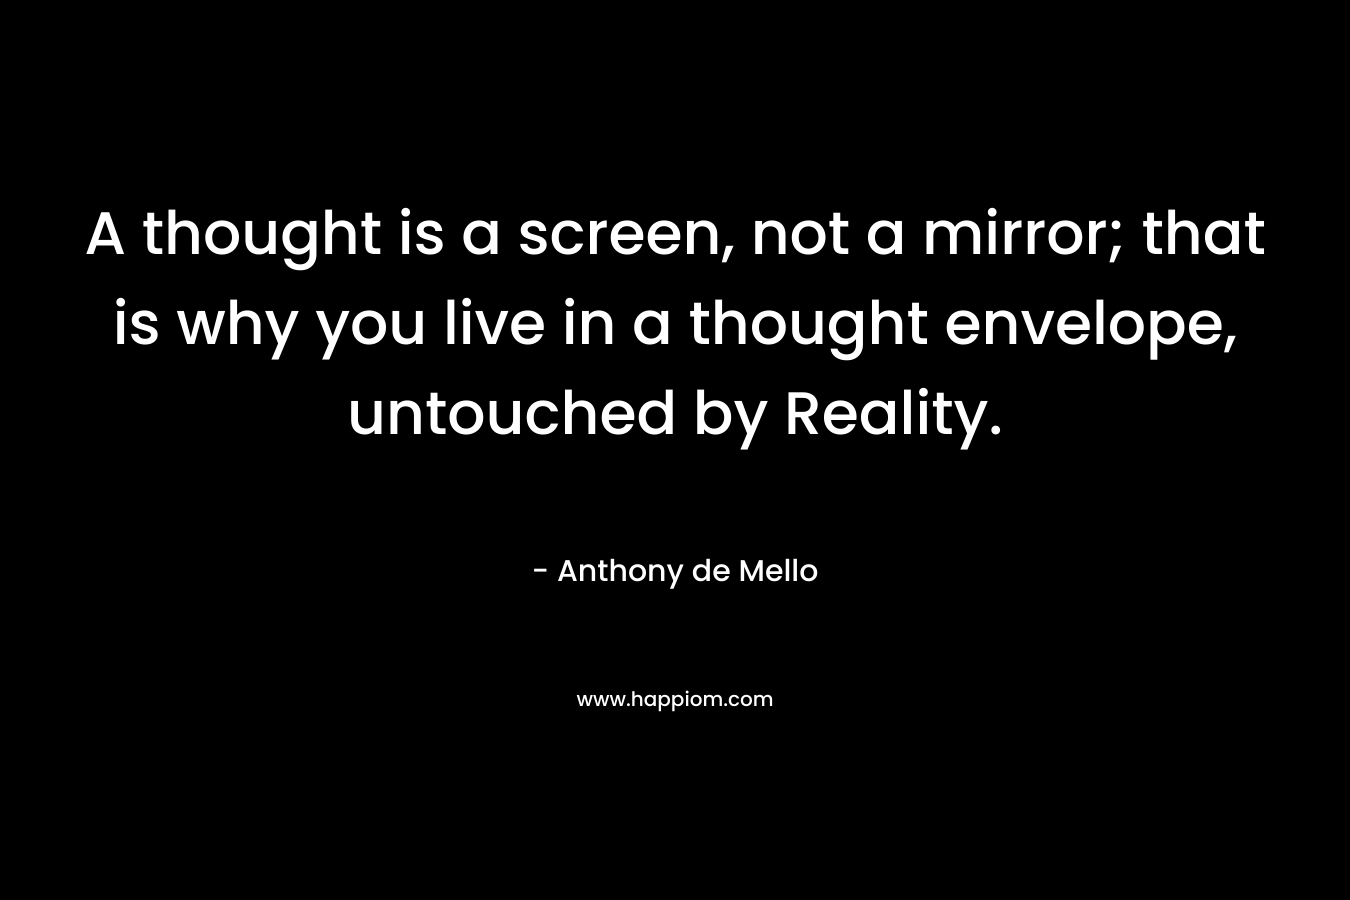 A thought is a screen, not a mirror; that is why you live in a thought envelope, untouched by Reality. – Anthony de Mello